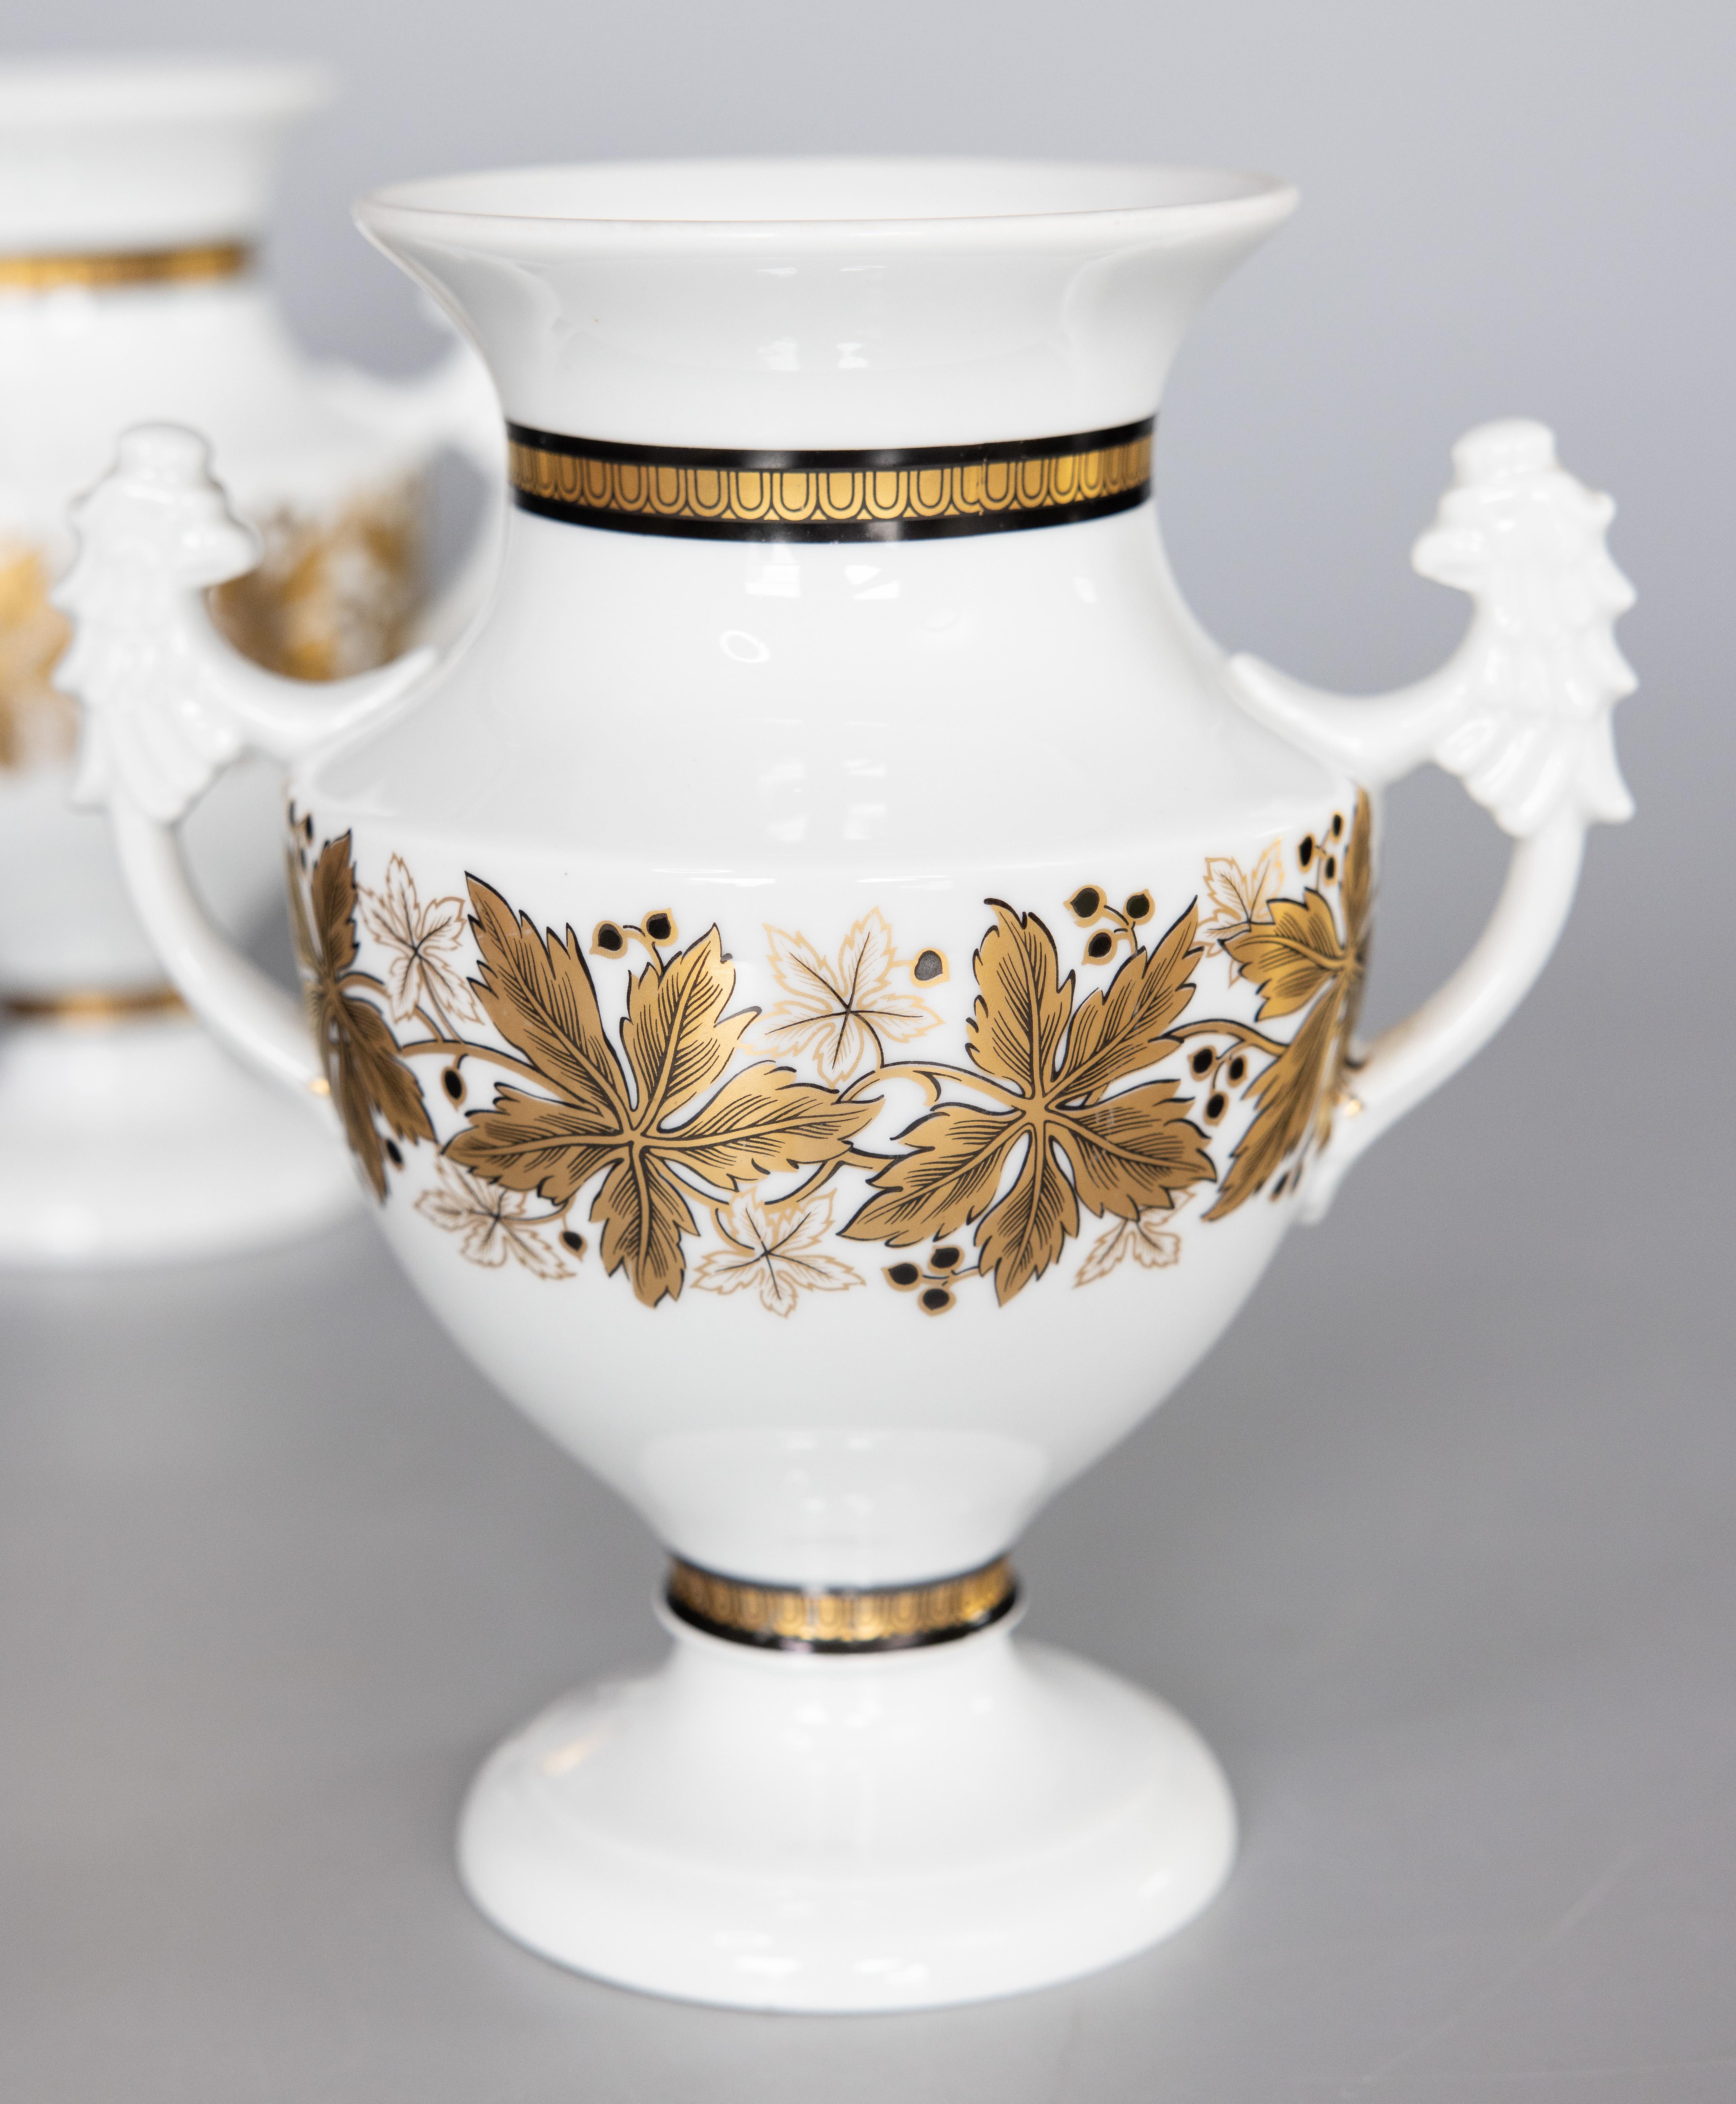 20th Century Pair of Neoclassical Royal Tettau German Porcelain White & Gold Urns c. 1930-50 For Sale